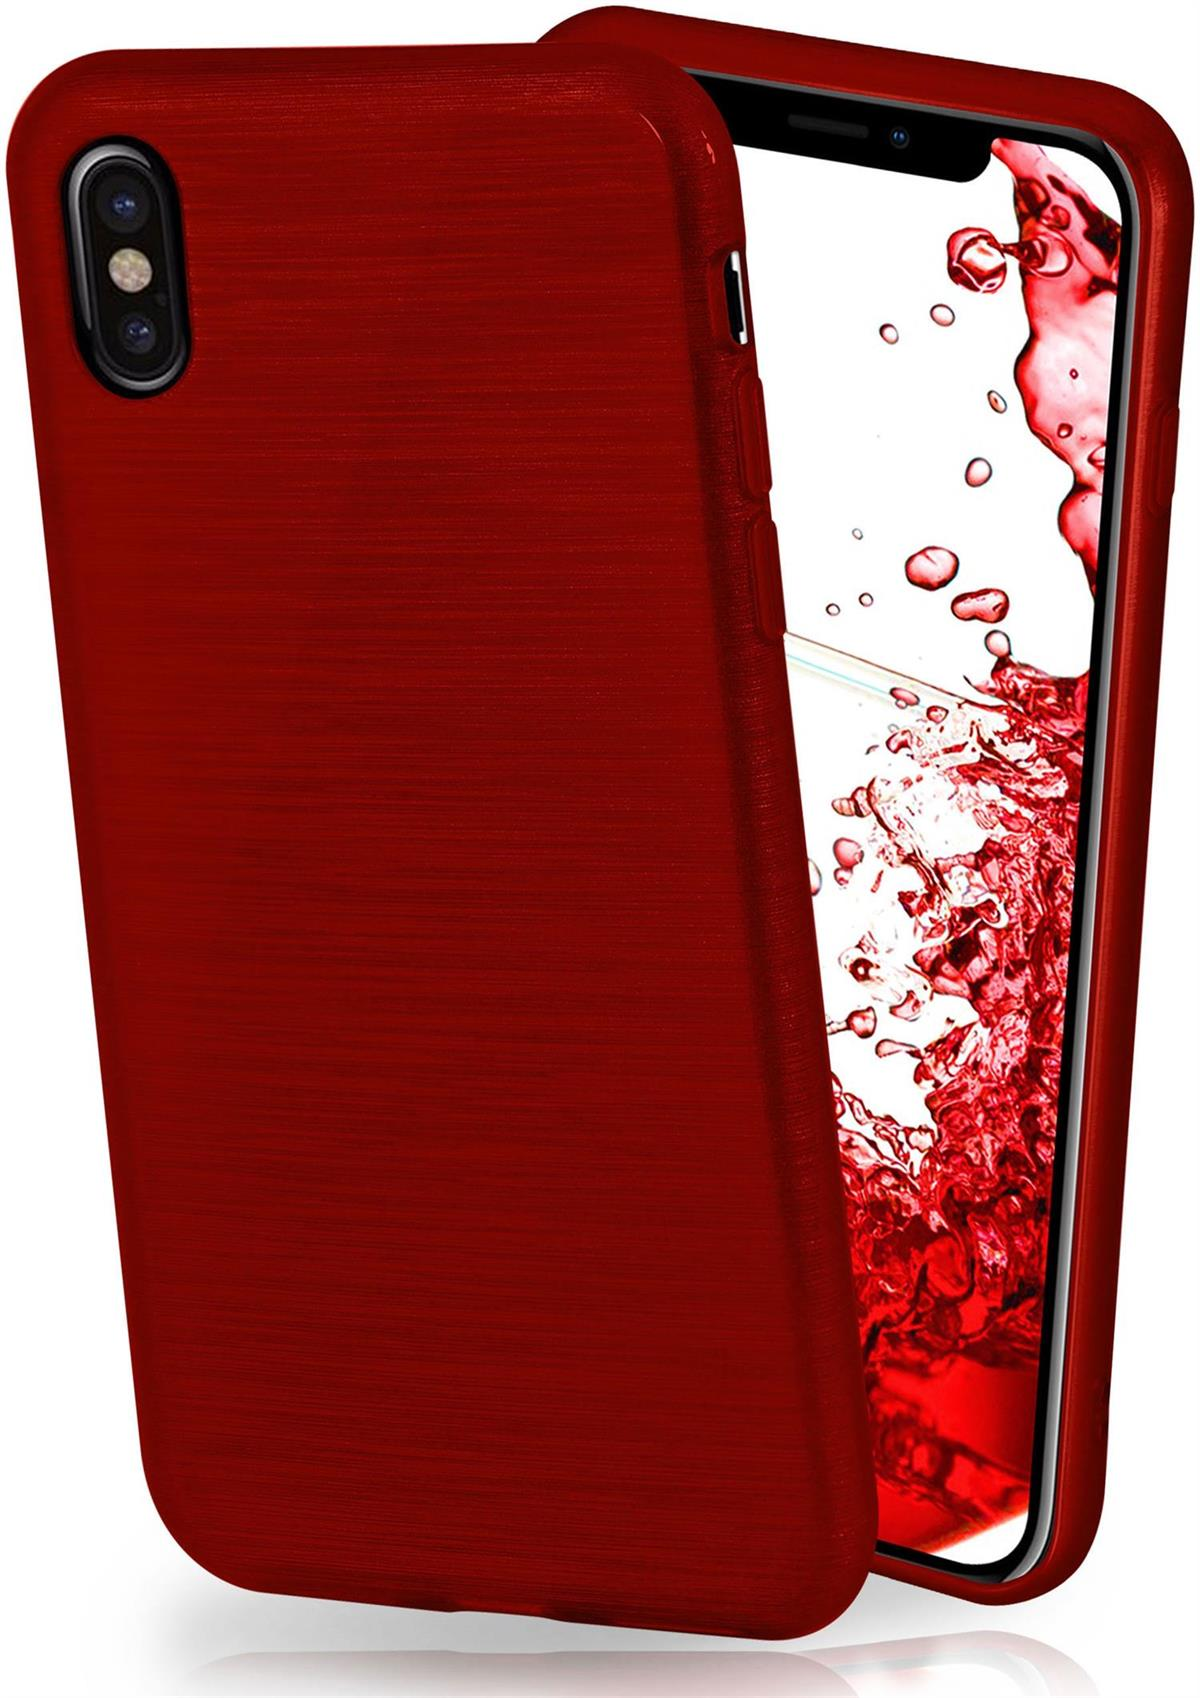 XS, MOEX Backcover, Brushed iPhone Apple, Case, Crimson-Red